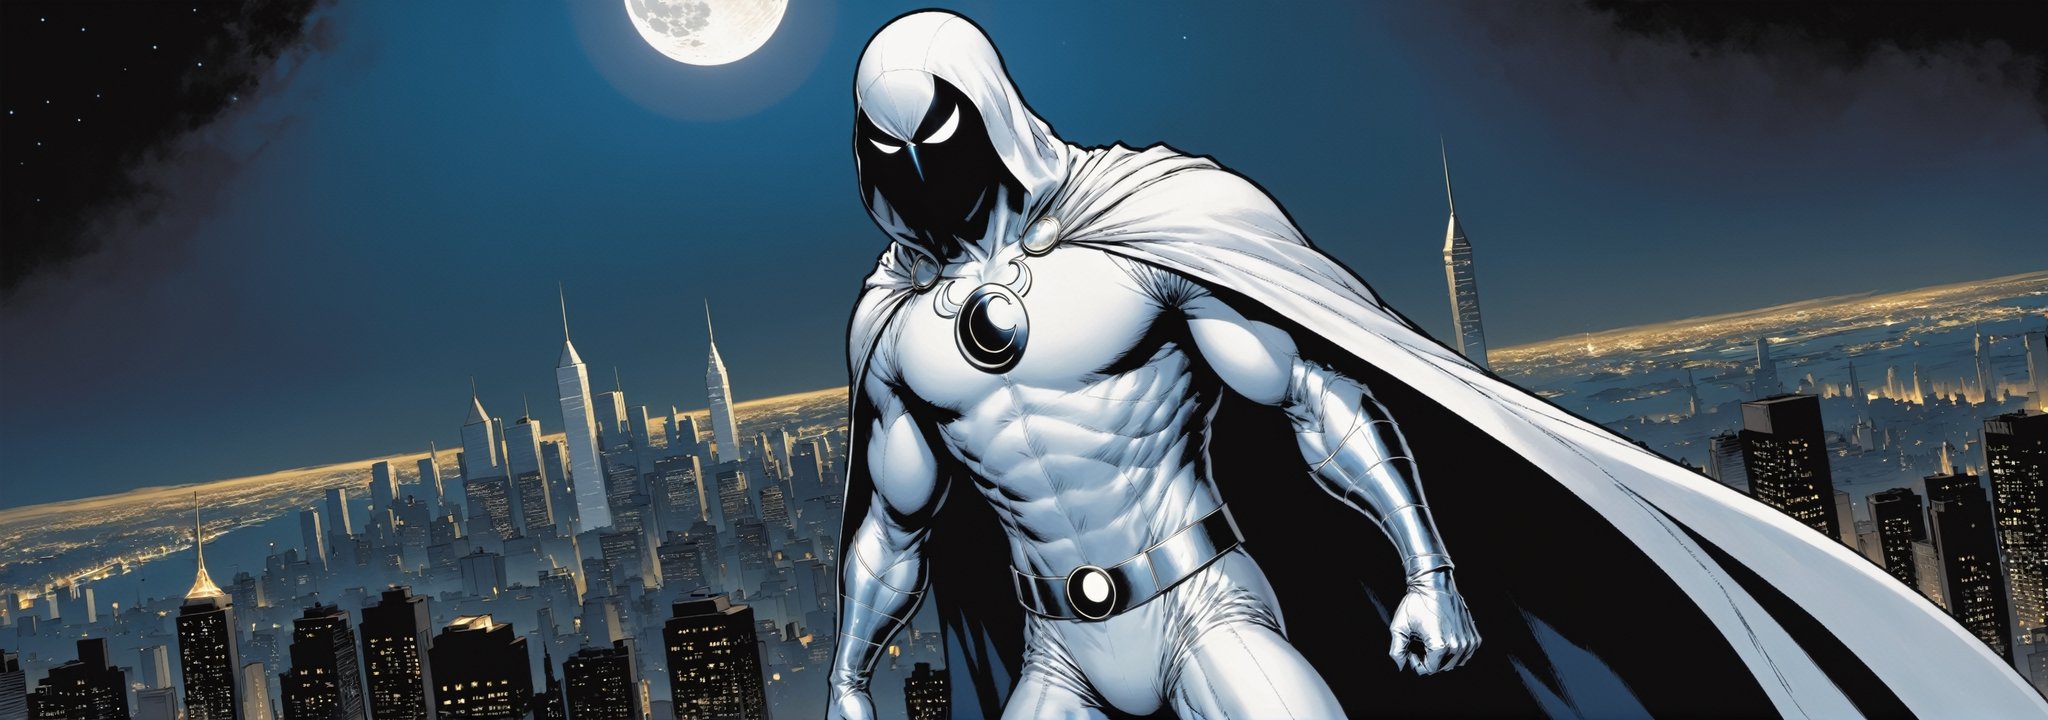 Standing atop a moonlit rooftop, the enigmatic figure known as Moon Knight cuts a striking silhouette against the city skyline. Clad in a suit of White leather, with a hooded cloak, ((adorned with intricate crescent moon motifs)), he exudes an aura of otherworldly power. His muscular physique is accentuated by the tight-fitting suit, which hugs his form like a second skin. A billowing White cape, flows behind him, adding to the air of mystique that surrounds him.

Atop his head rests a hooded cloak and cowl, concealing his features in shadow while his piercing white eyes gleam with an otherworldly intensity. In one hand, he grips a crescent-shaped staff, a versatile weapon capable of both striking down his foes and aiding in his acrobatic feats. On his utility belt, an array of gadgets and tools are holstered, ready to be deployed at a moment's notice.

With an air of silent determination, Moon Knight stands ready to mete out justice upon those who would dare to threaten the innocent, his presence a beacon of hope in the darkness of the night.